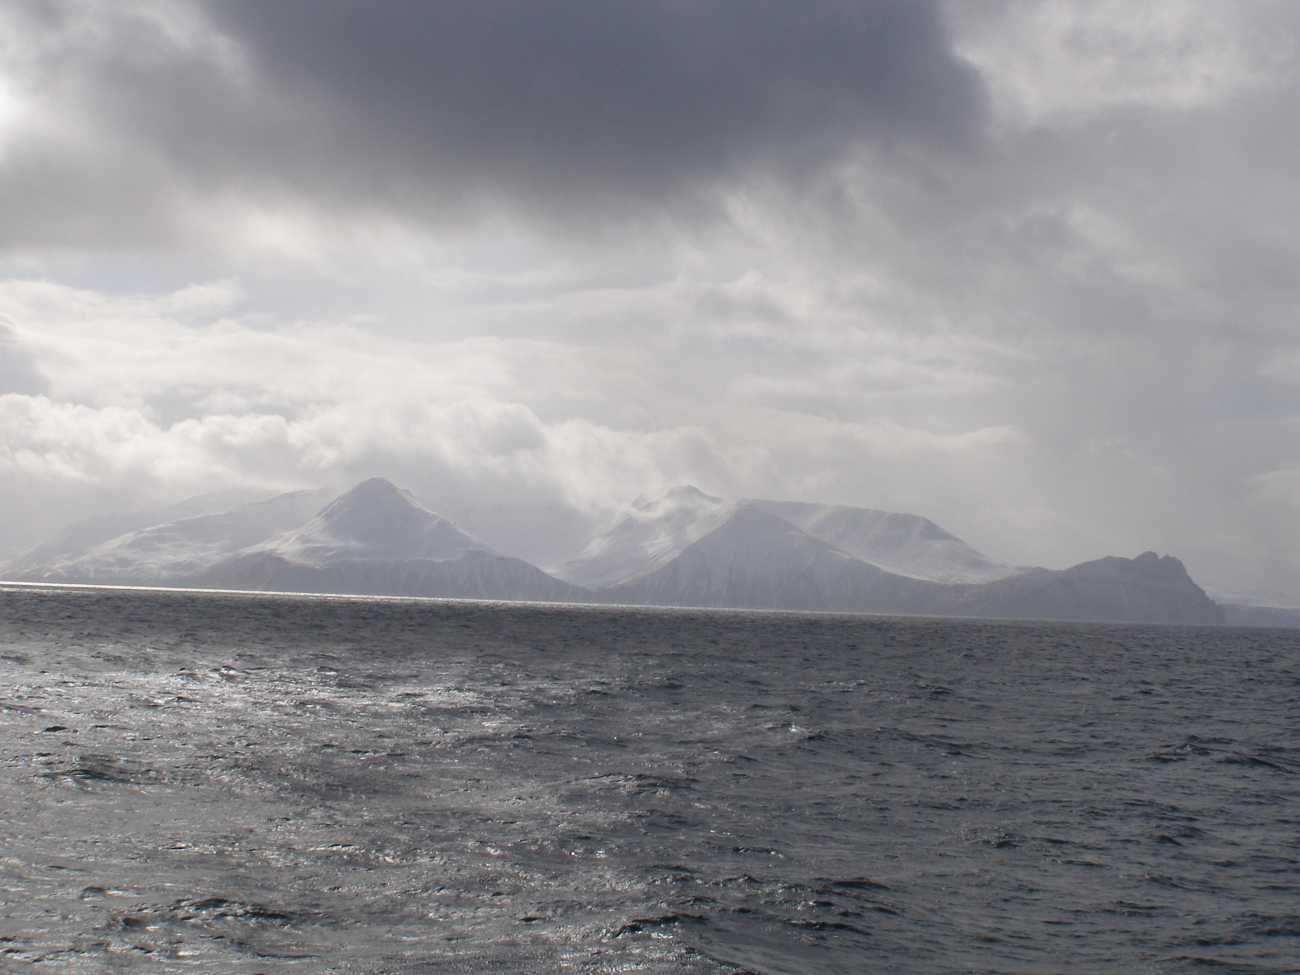 A typical Aleutian day with clouds, snow, and grey leaden sea